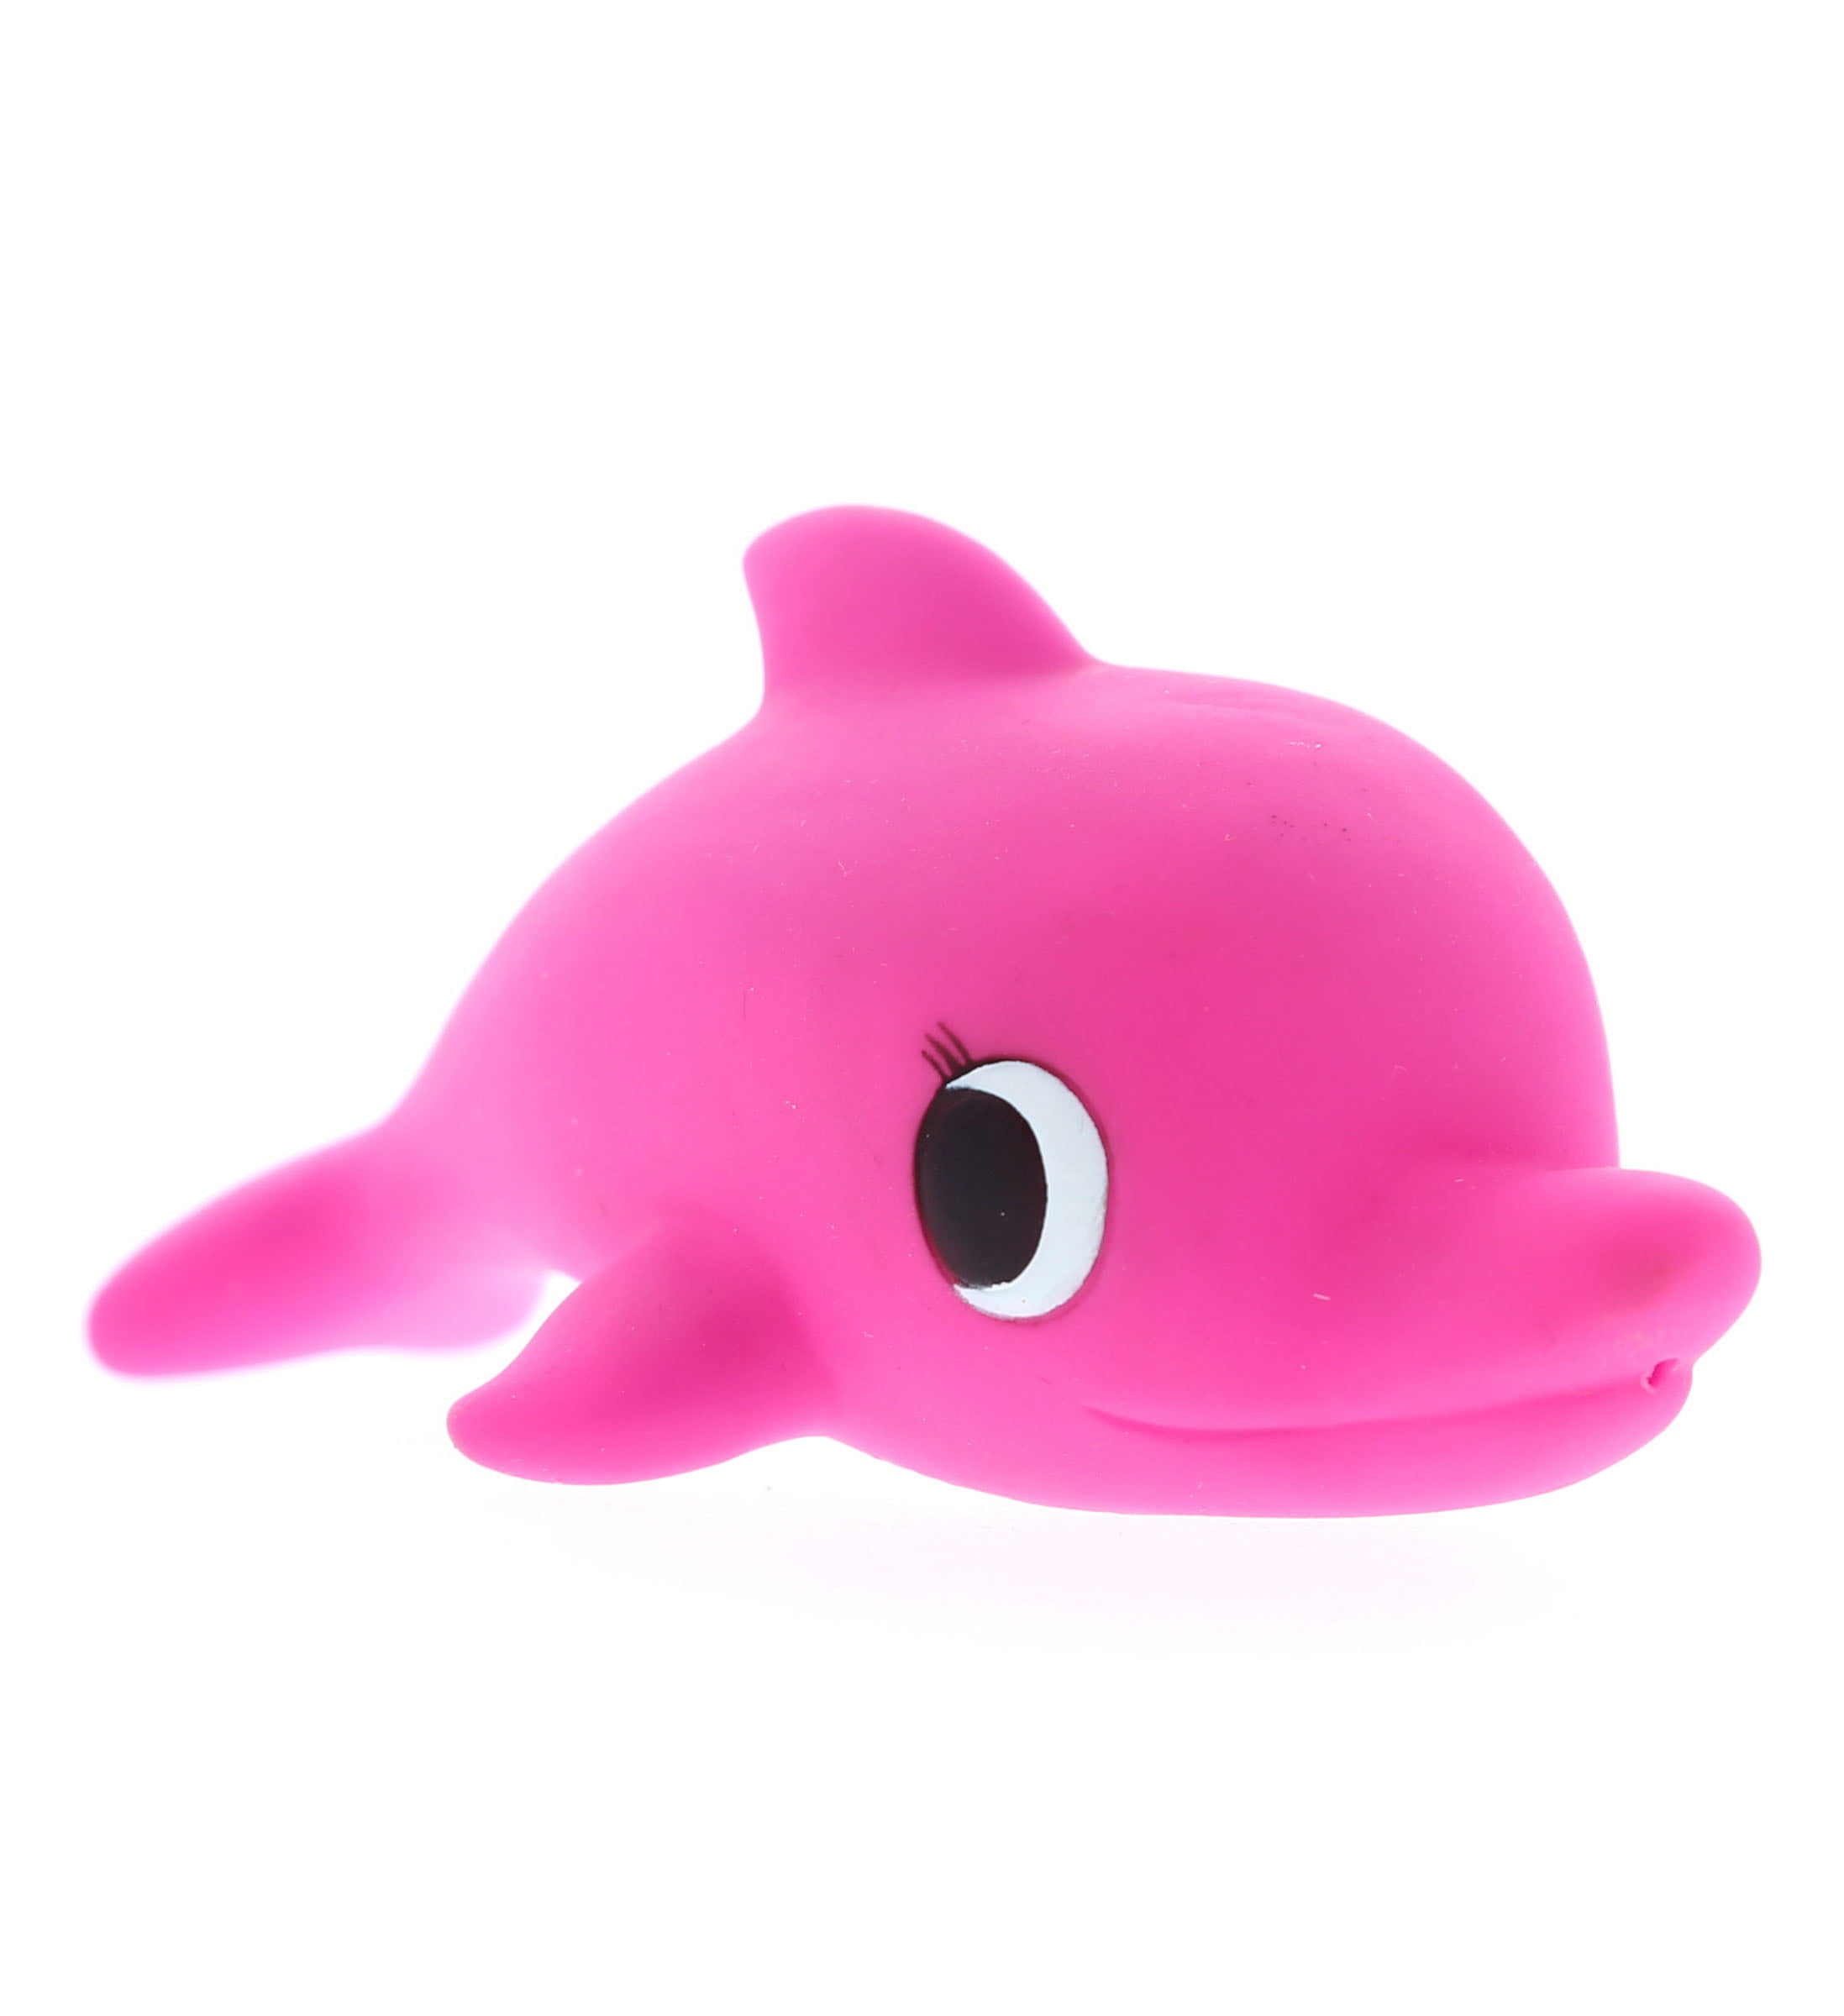 DOLPHIN BATH TOY DOLPHINS GIFT KIDS CHILD NOVELTY bathing toy Dolphin and Babies 